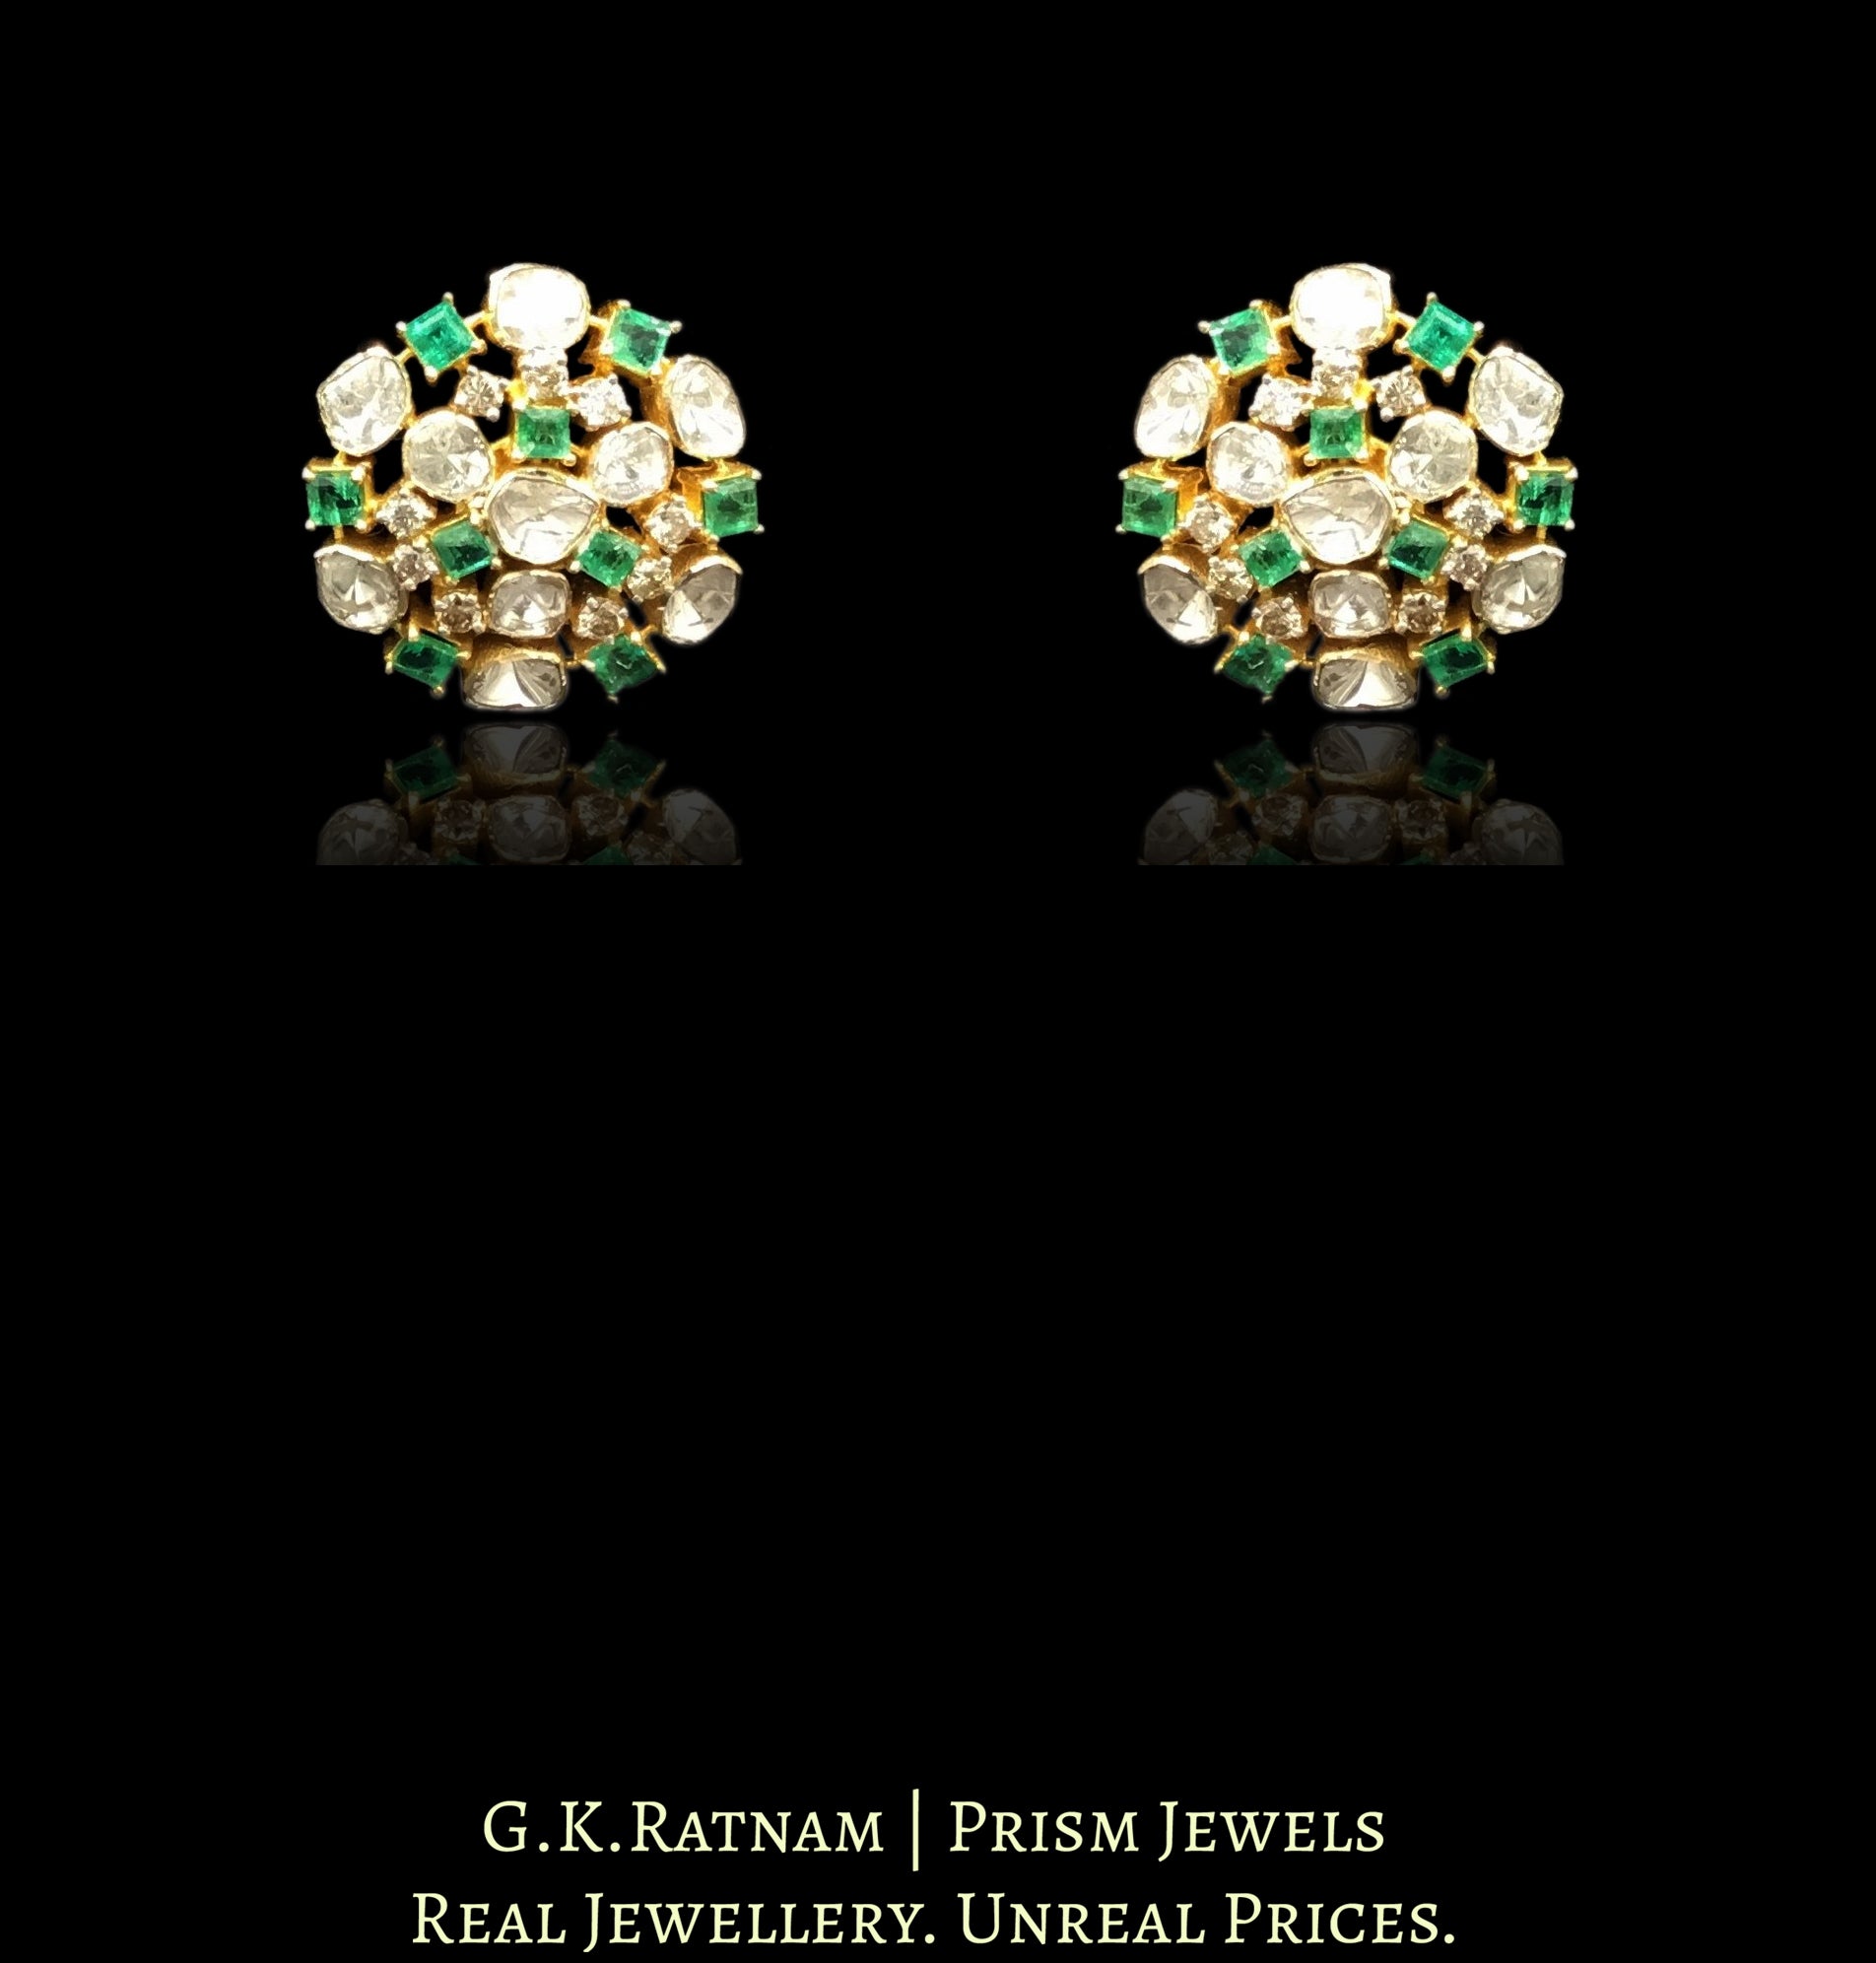 14k Gold and Diamond Polki Open Setting Karanphool Earring Pair with Natural Emerald Chawkis (squares)